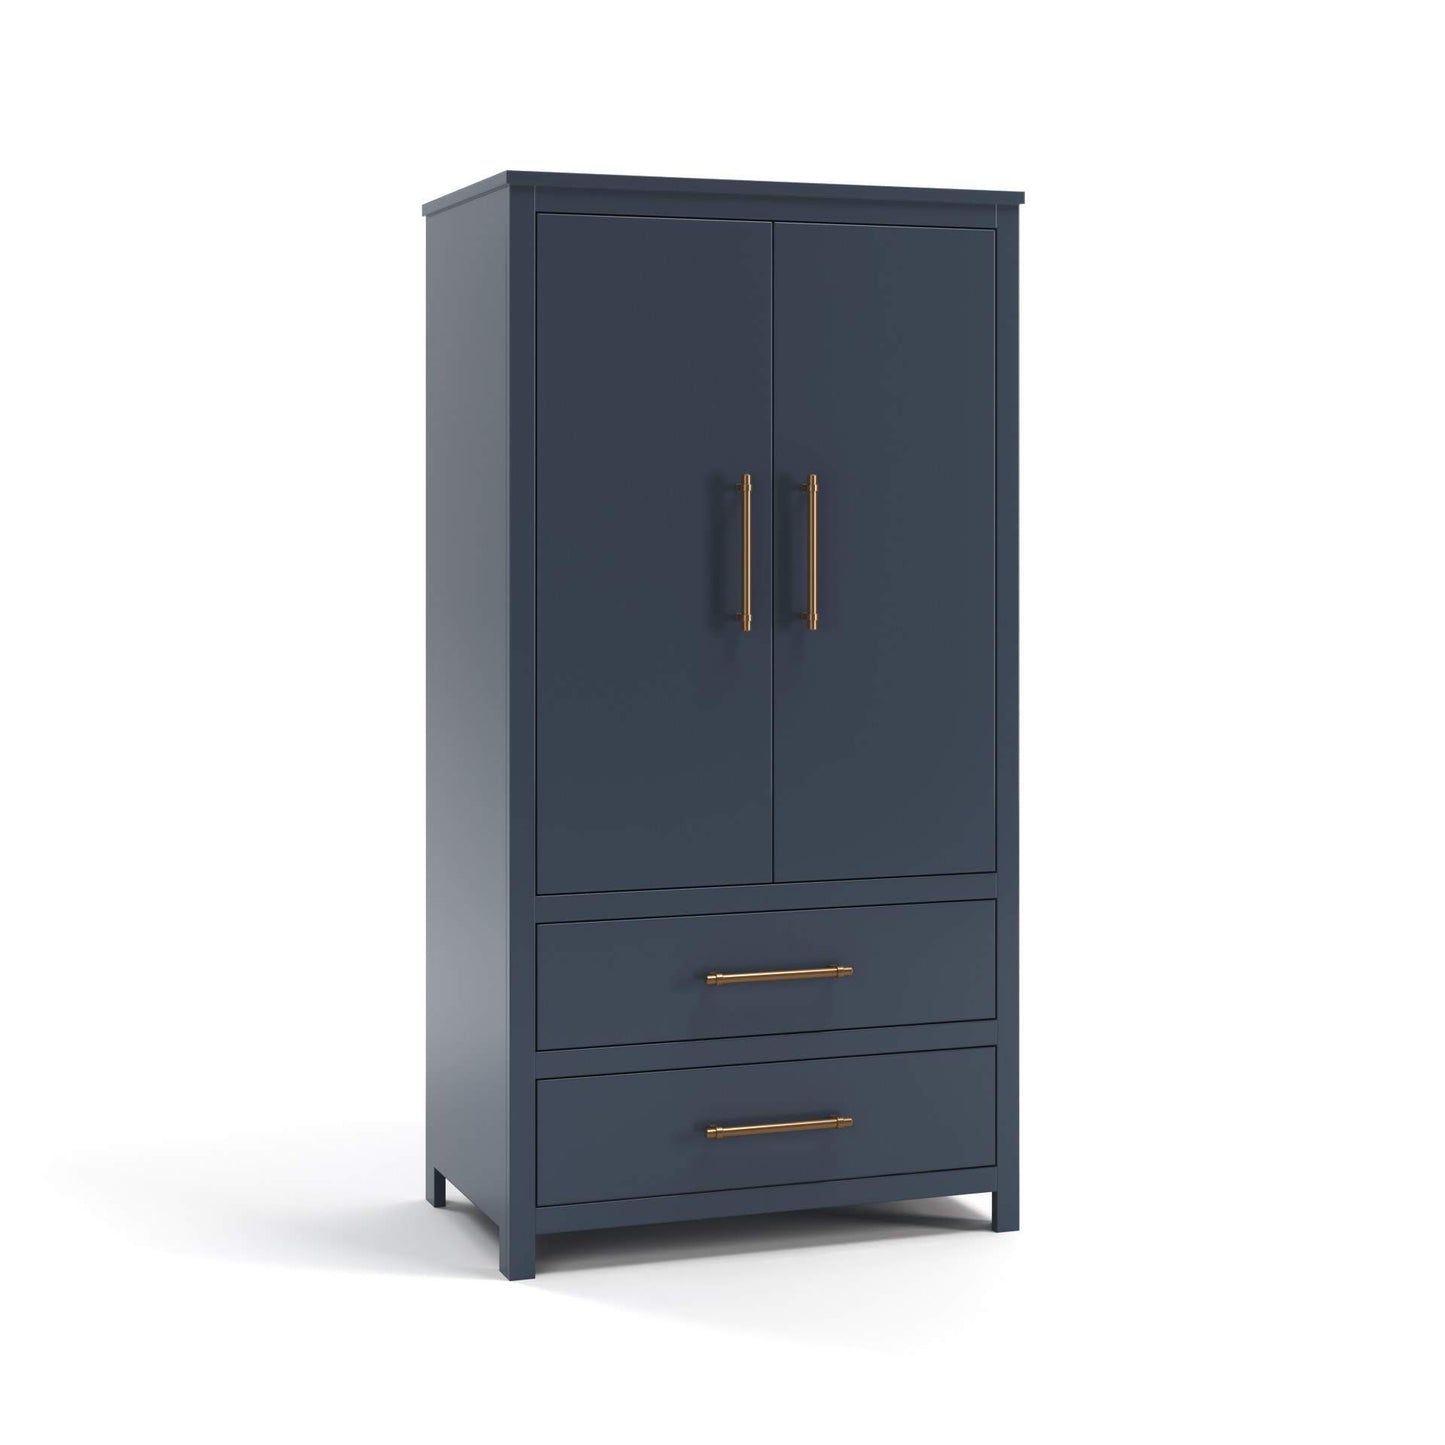 Acadia Tremont Armoire with Two Drawers features either a hanging bar or adjustable shelving as well as two drawers. Shown in Hale Navy finish.